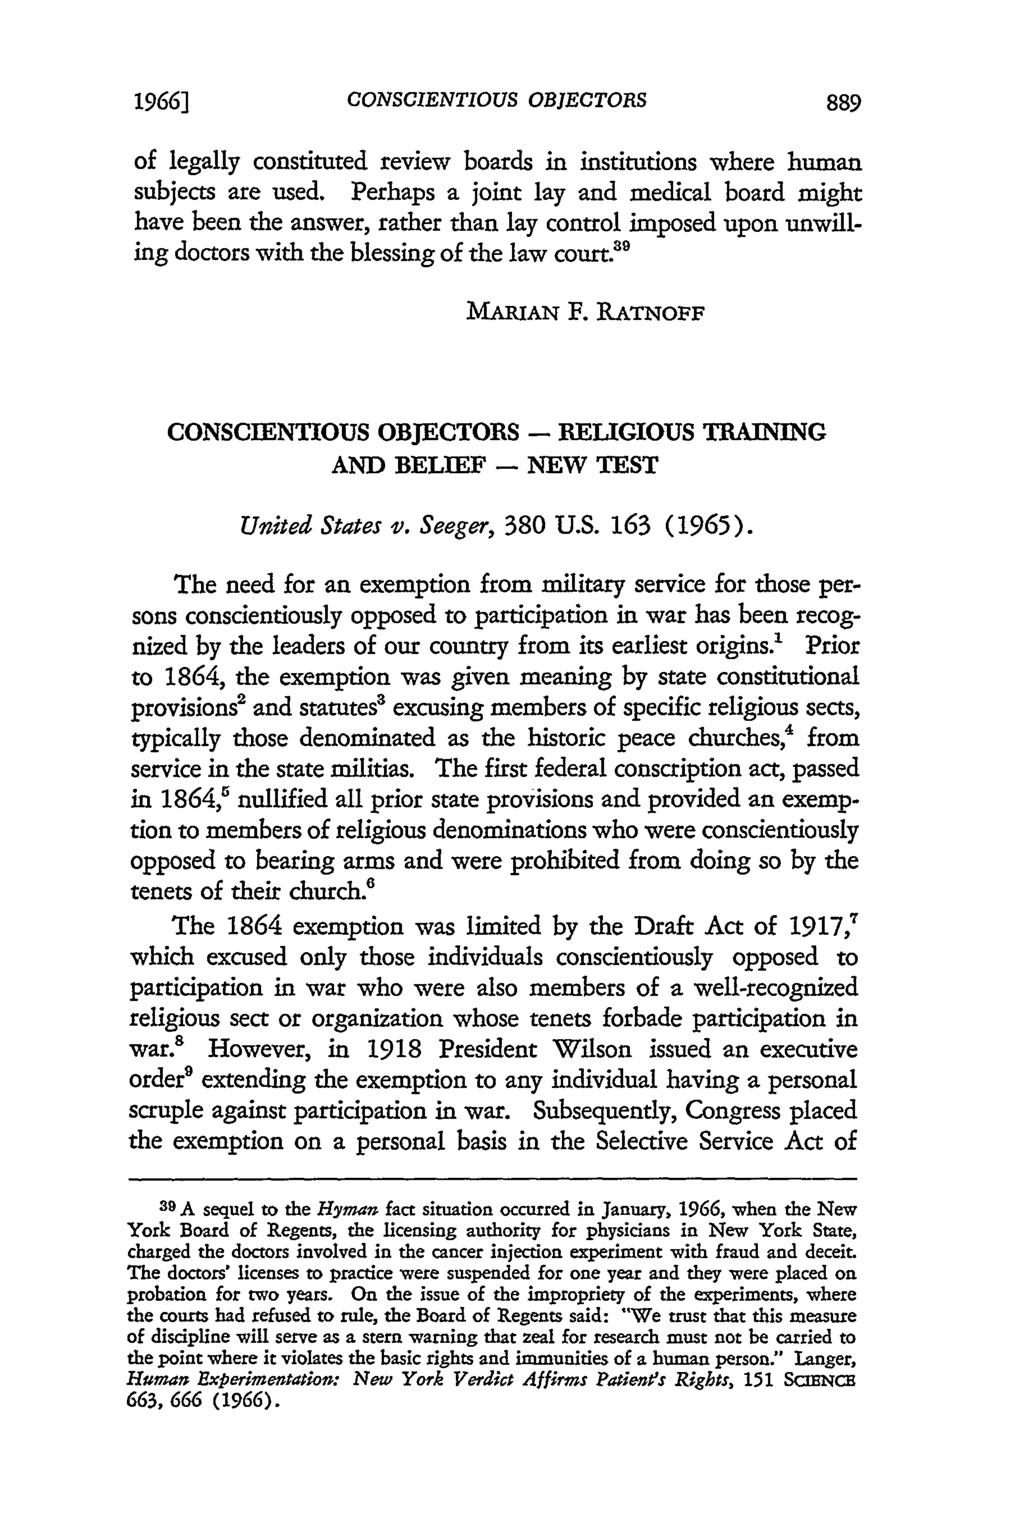 1966] CONSCIENTIOUS OBJECTORS of legally constituted review boards in institutions where human subjects are used.